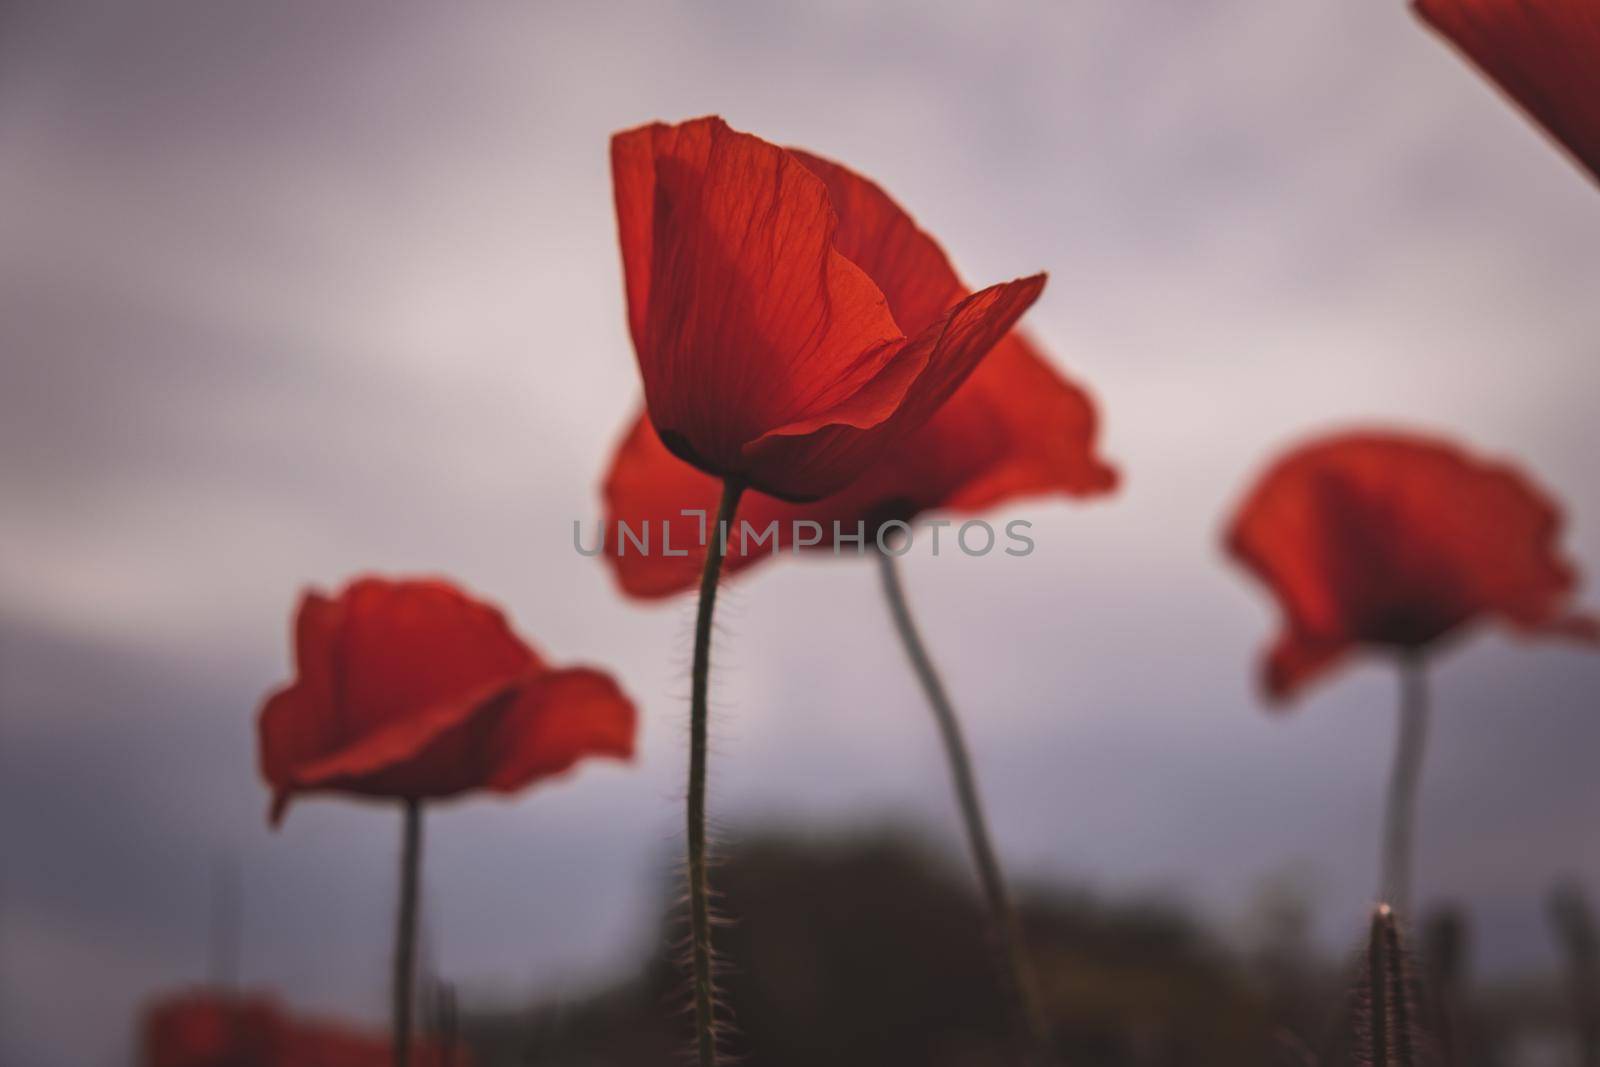 Red poppy in summer. Close-up Of Poppy blossom Flowers. Card with flowers. Remembrance day symbol